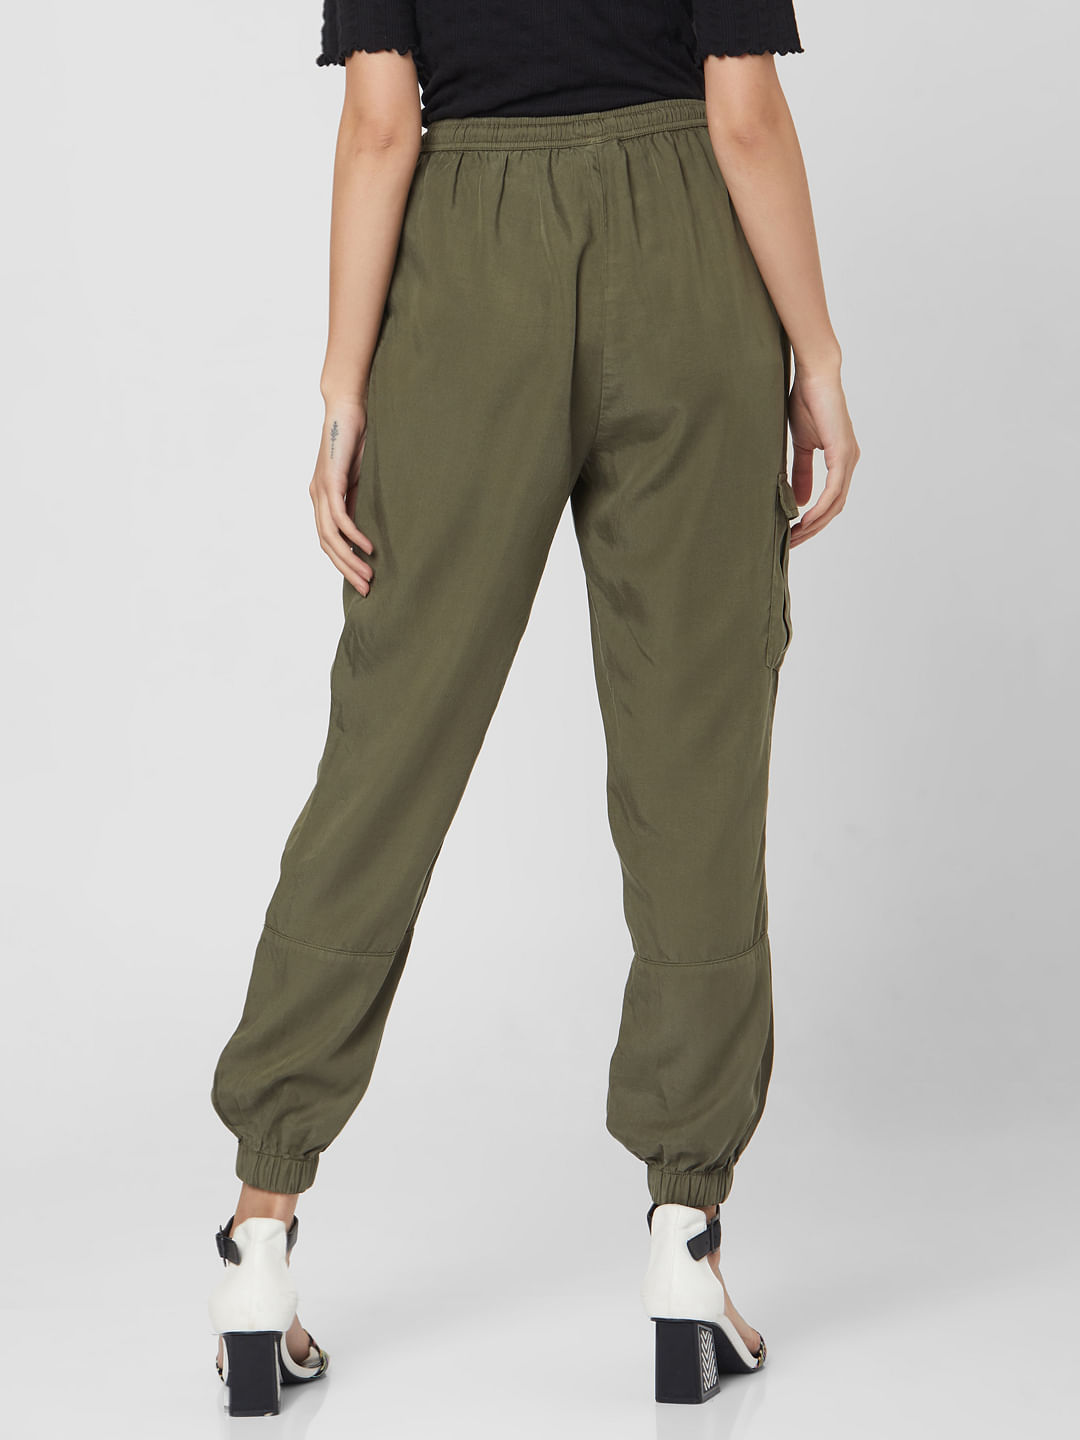 Buy Olive Trousers & Pants for Women by Kassually Online | Ajio.com